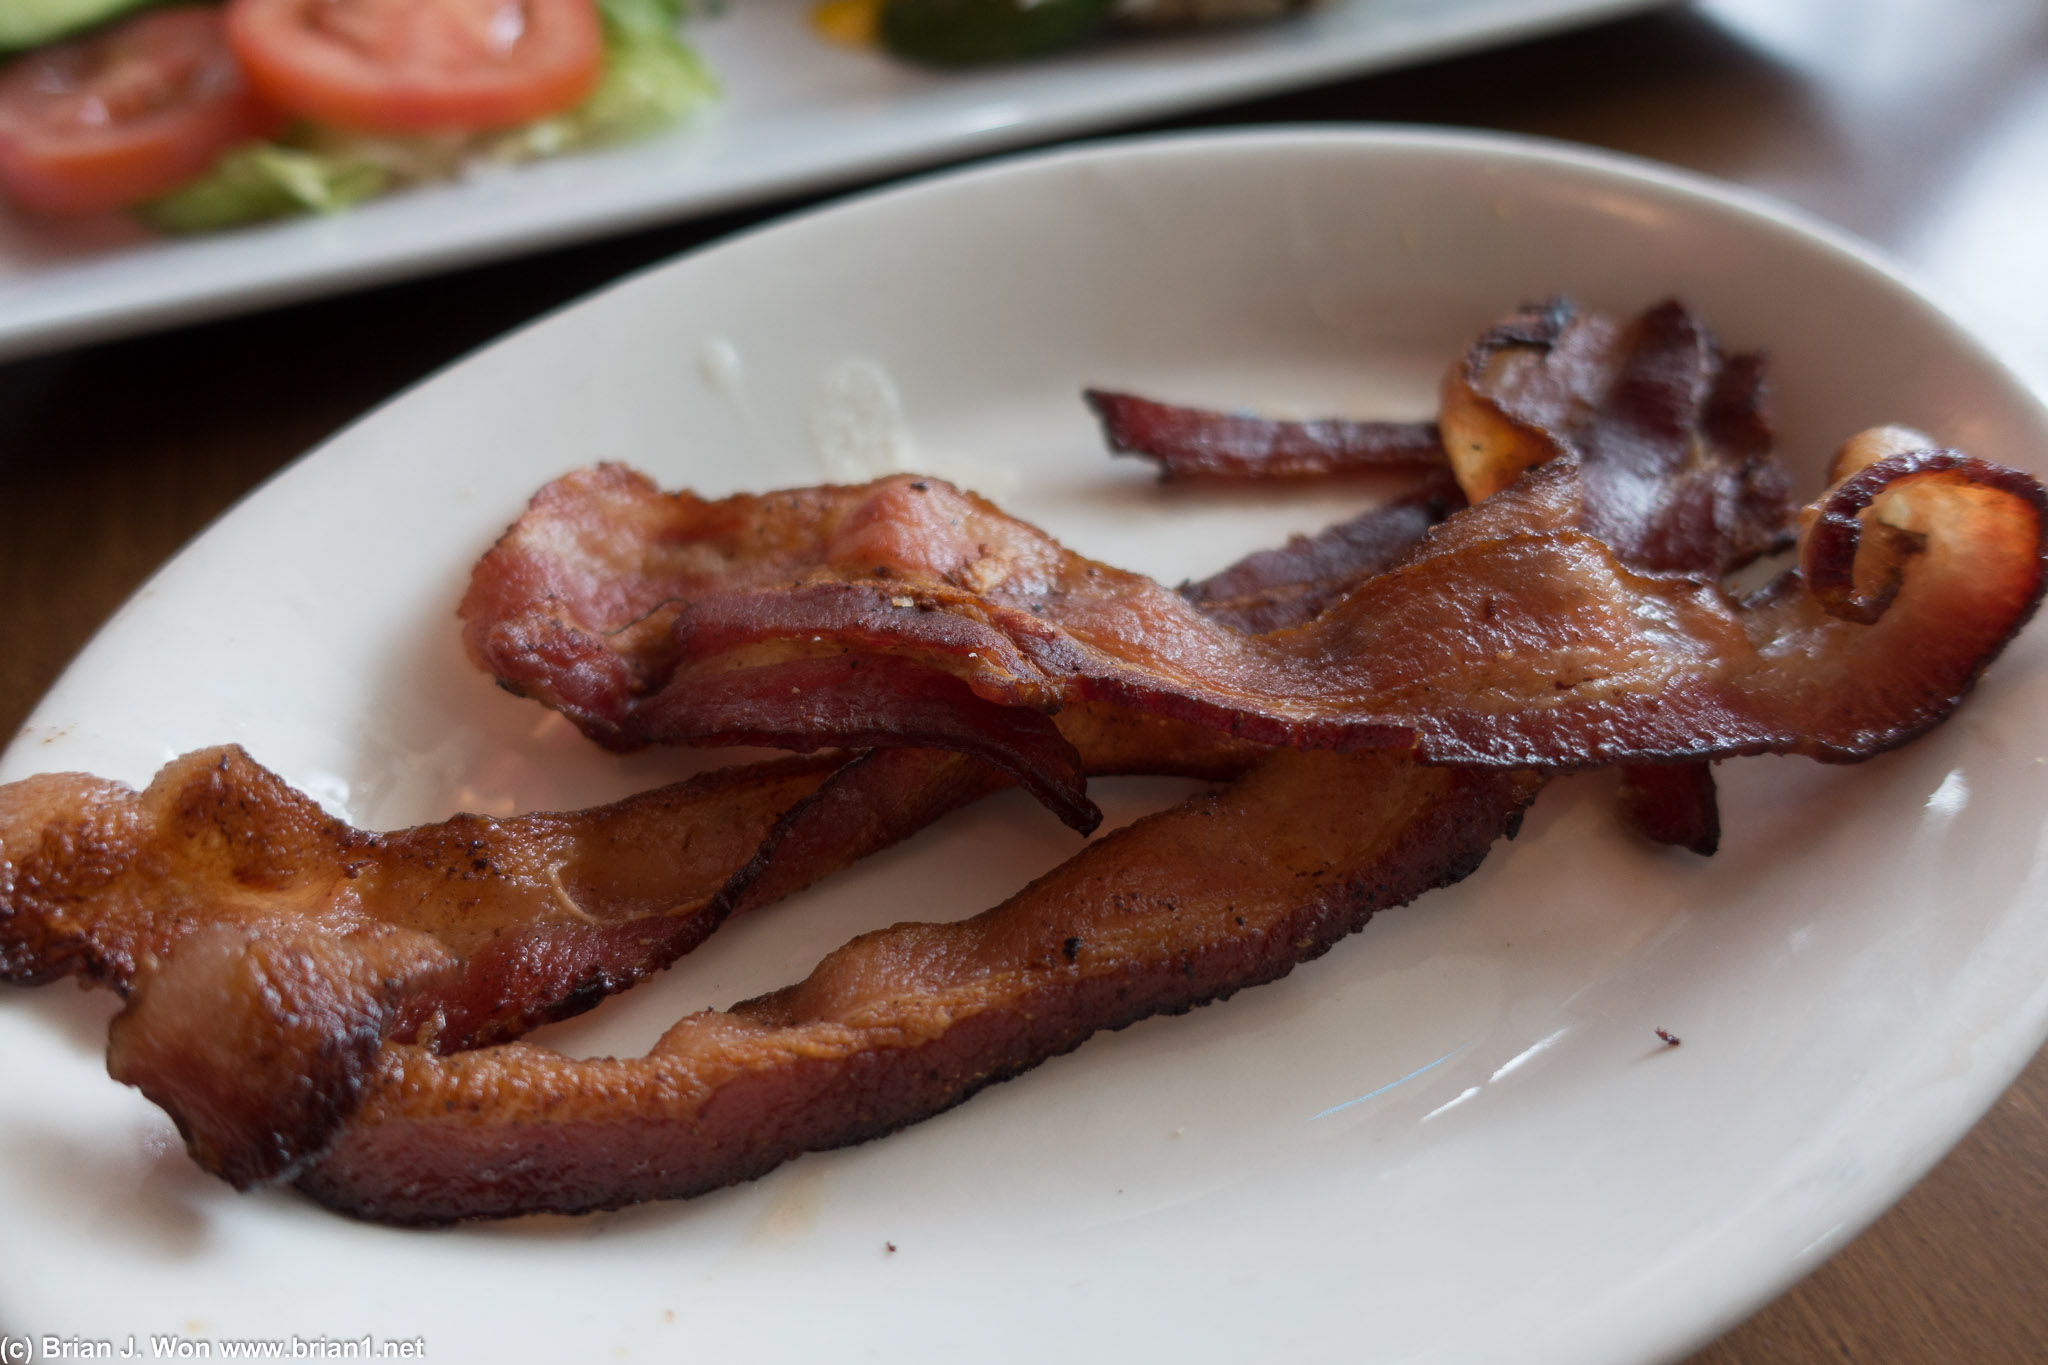 Bacon was very good.